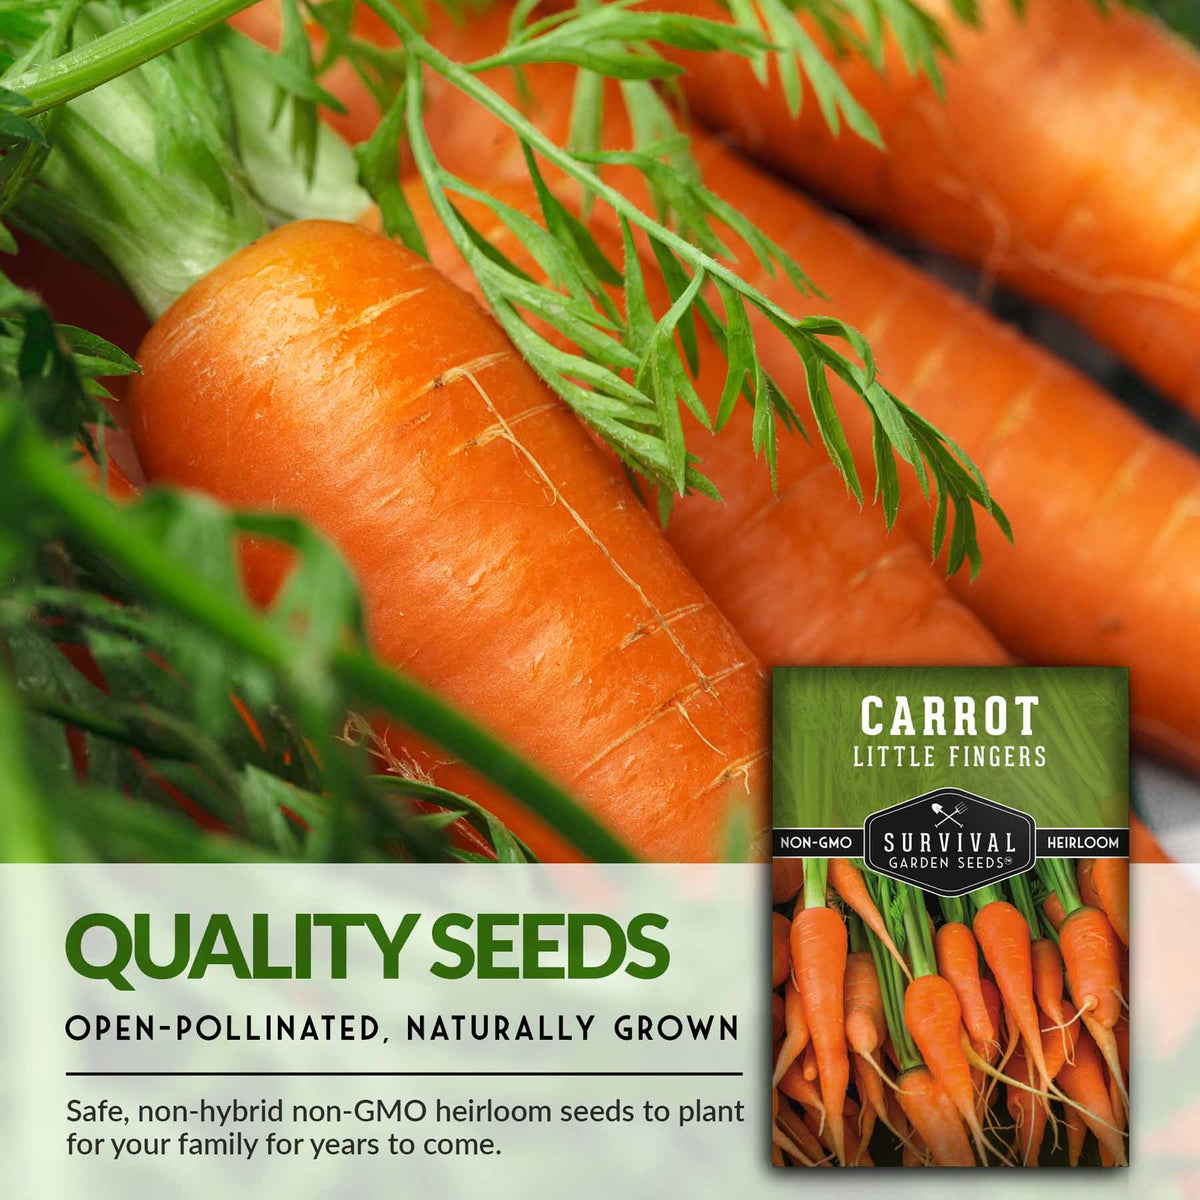 Quality, open-pollinated heirloom carrot seeds